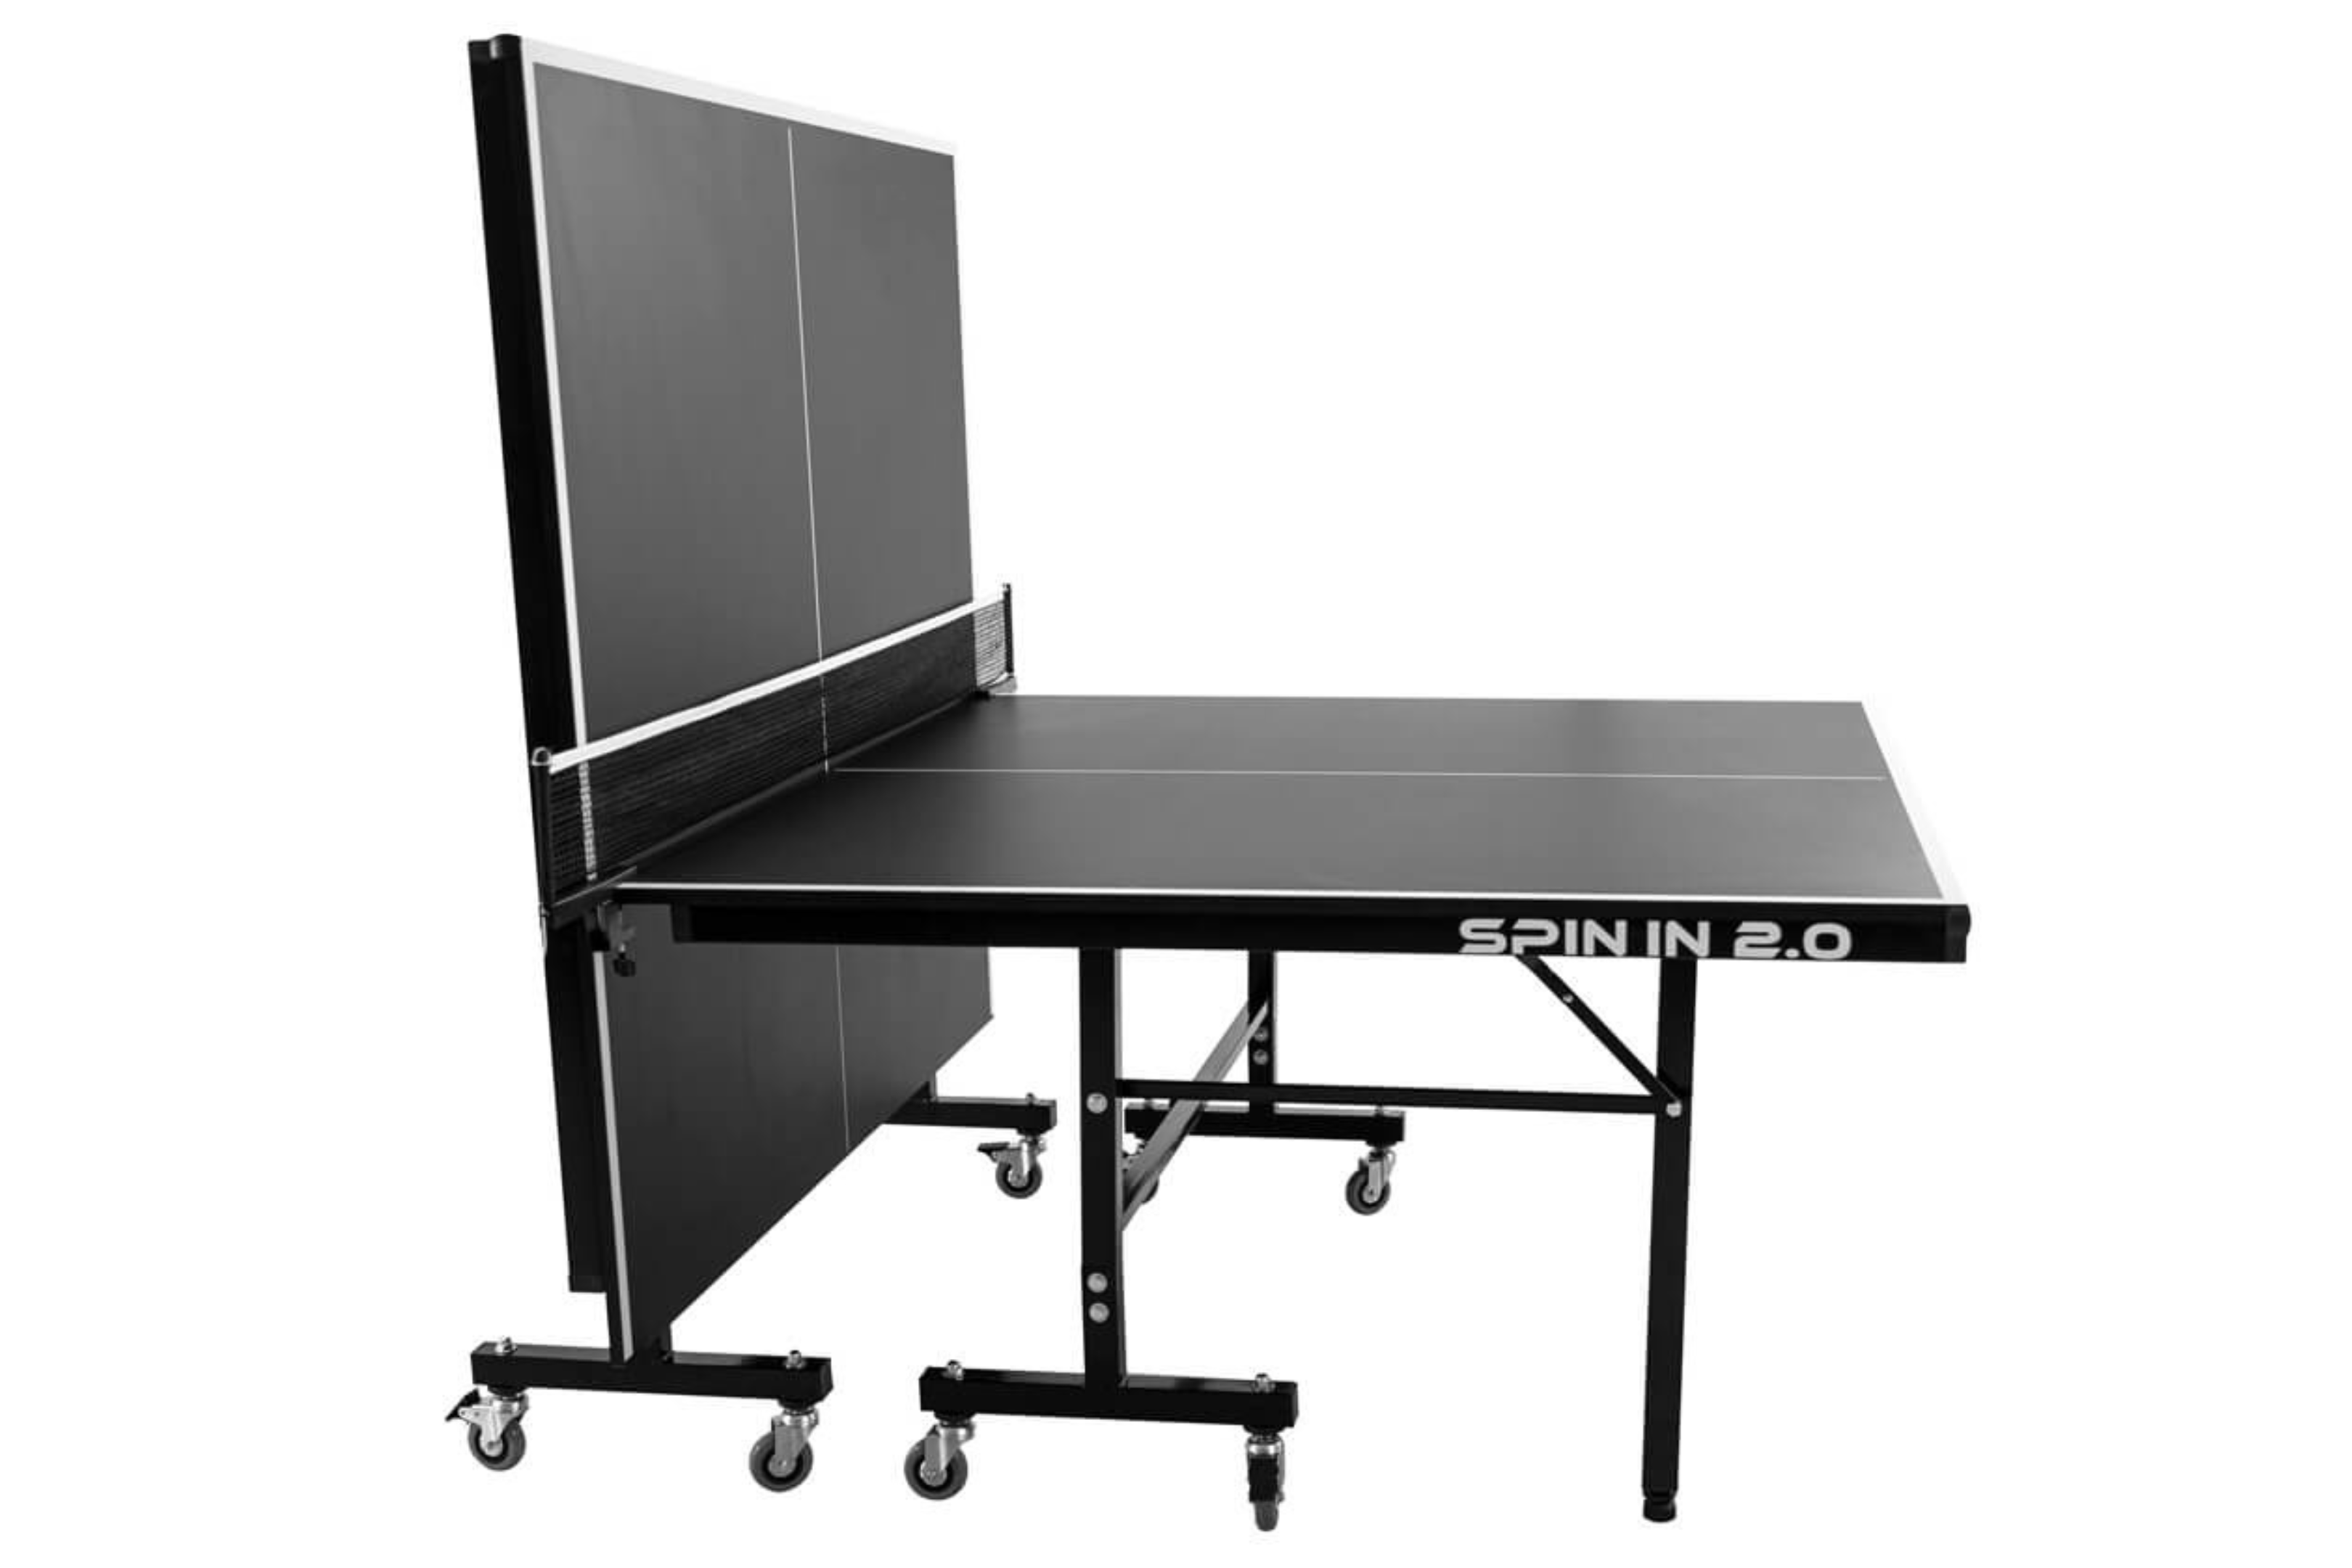 TABLE DE PING PONG MASTER SPEED DESSUS NOIR &quot;SPIN IN&quot; 18 MM MDF